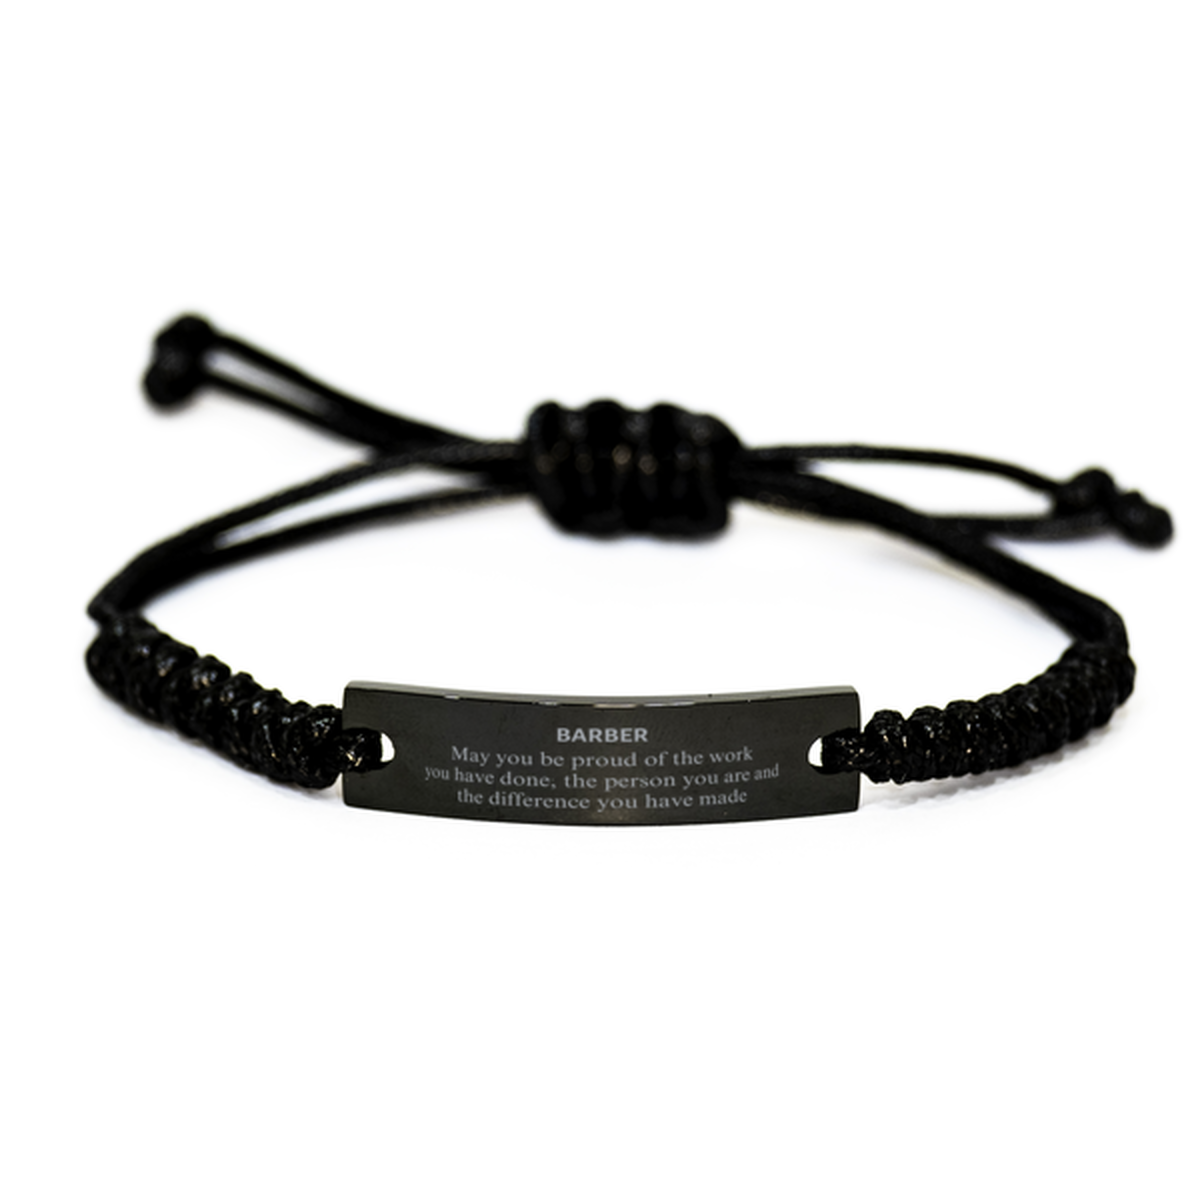 Barber May you be proud of the work you have done, Retirement Barber Black Rope Bracelet for Colleague Appreciation Gifts Amazing for Barber